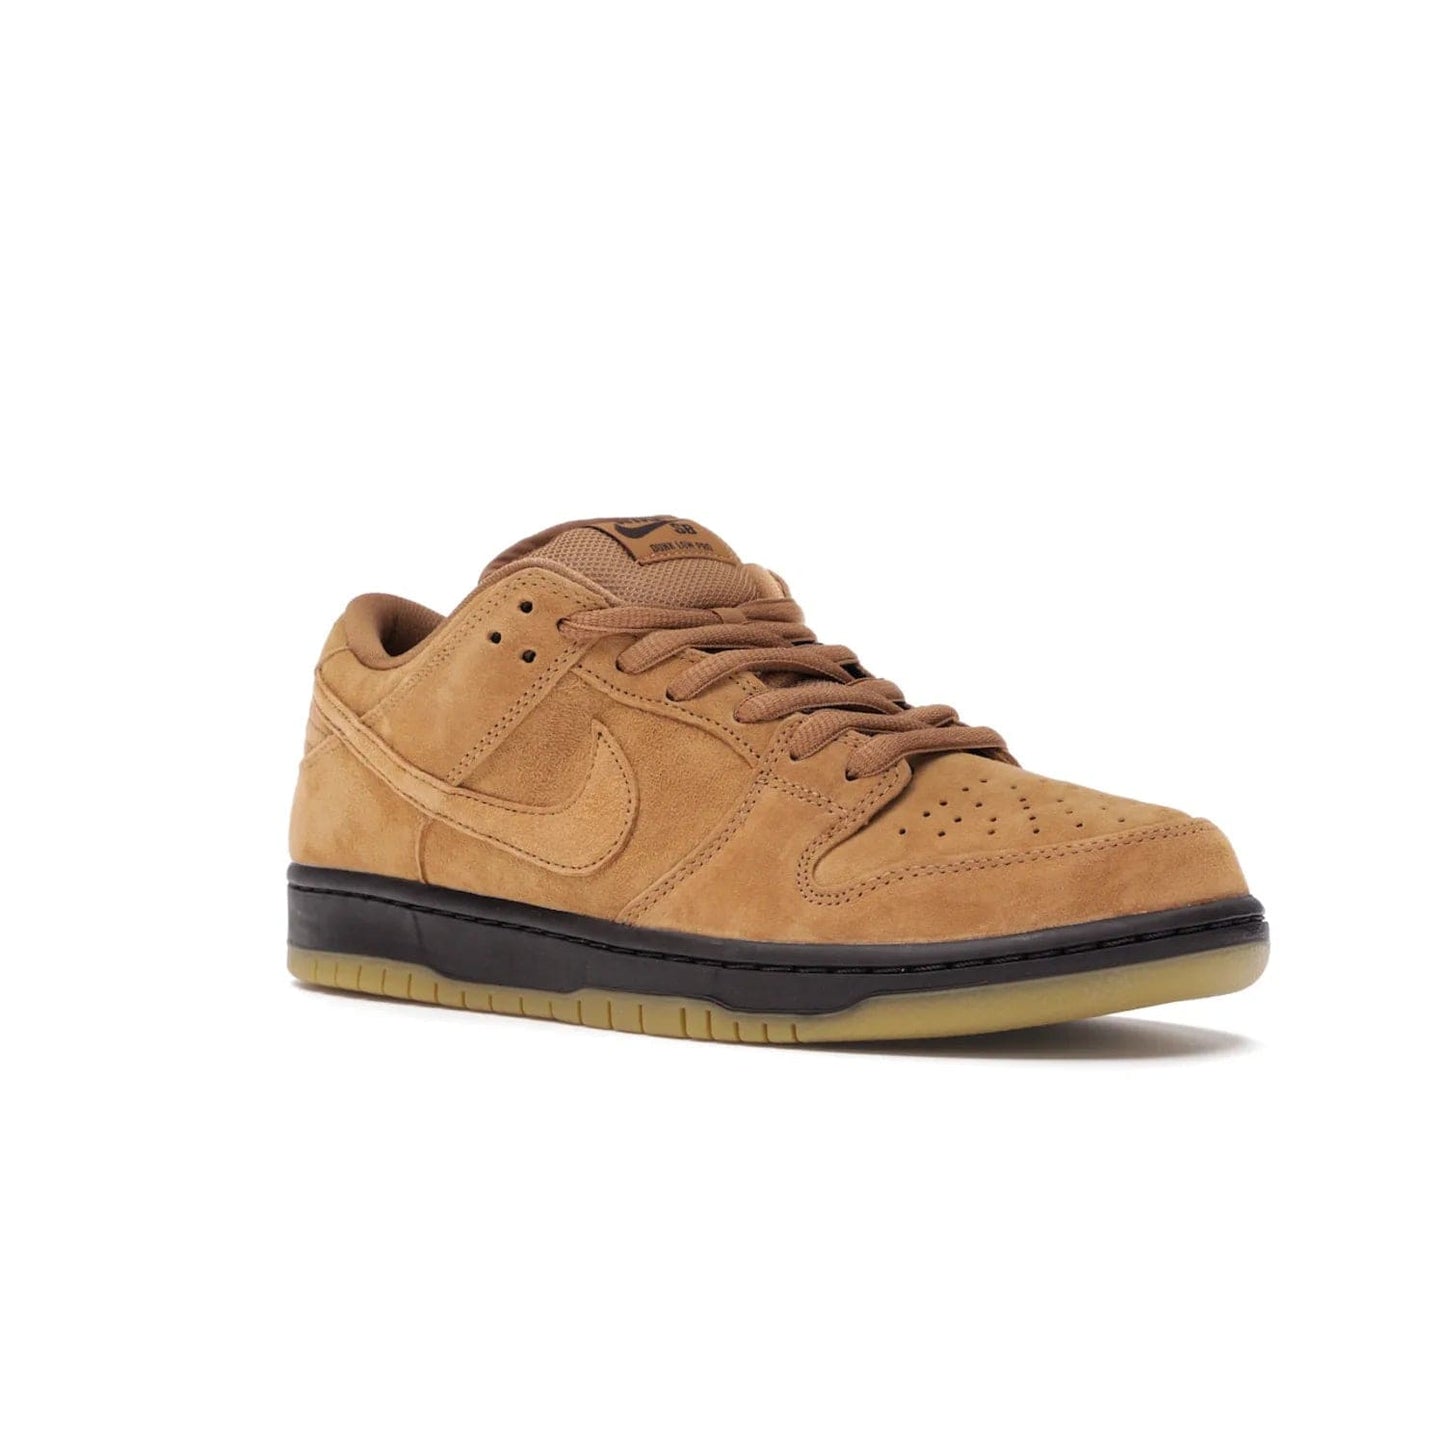 Nike SB Dunk Low Wheat (2021/2023) - Image 5 - Only at www.BallersClubKickz.com - The Nike SB Dunk Low Wheat (2021/2023)has a sleek silhouette and wheat suede upper. Tan tones for lining, mesh tongues, and laces. Iconic color palette midsole, perforated boxing toe. Brown branding on tongue and heel. Gum rubber outsole with partitioned pattern for traction. Eschewed in Feb 2021 for $110.